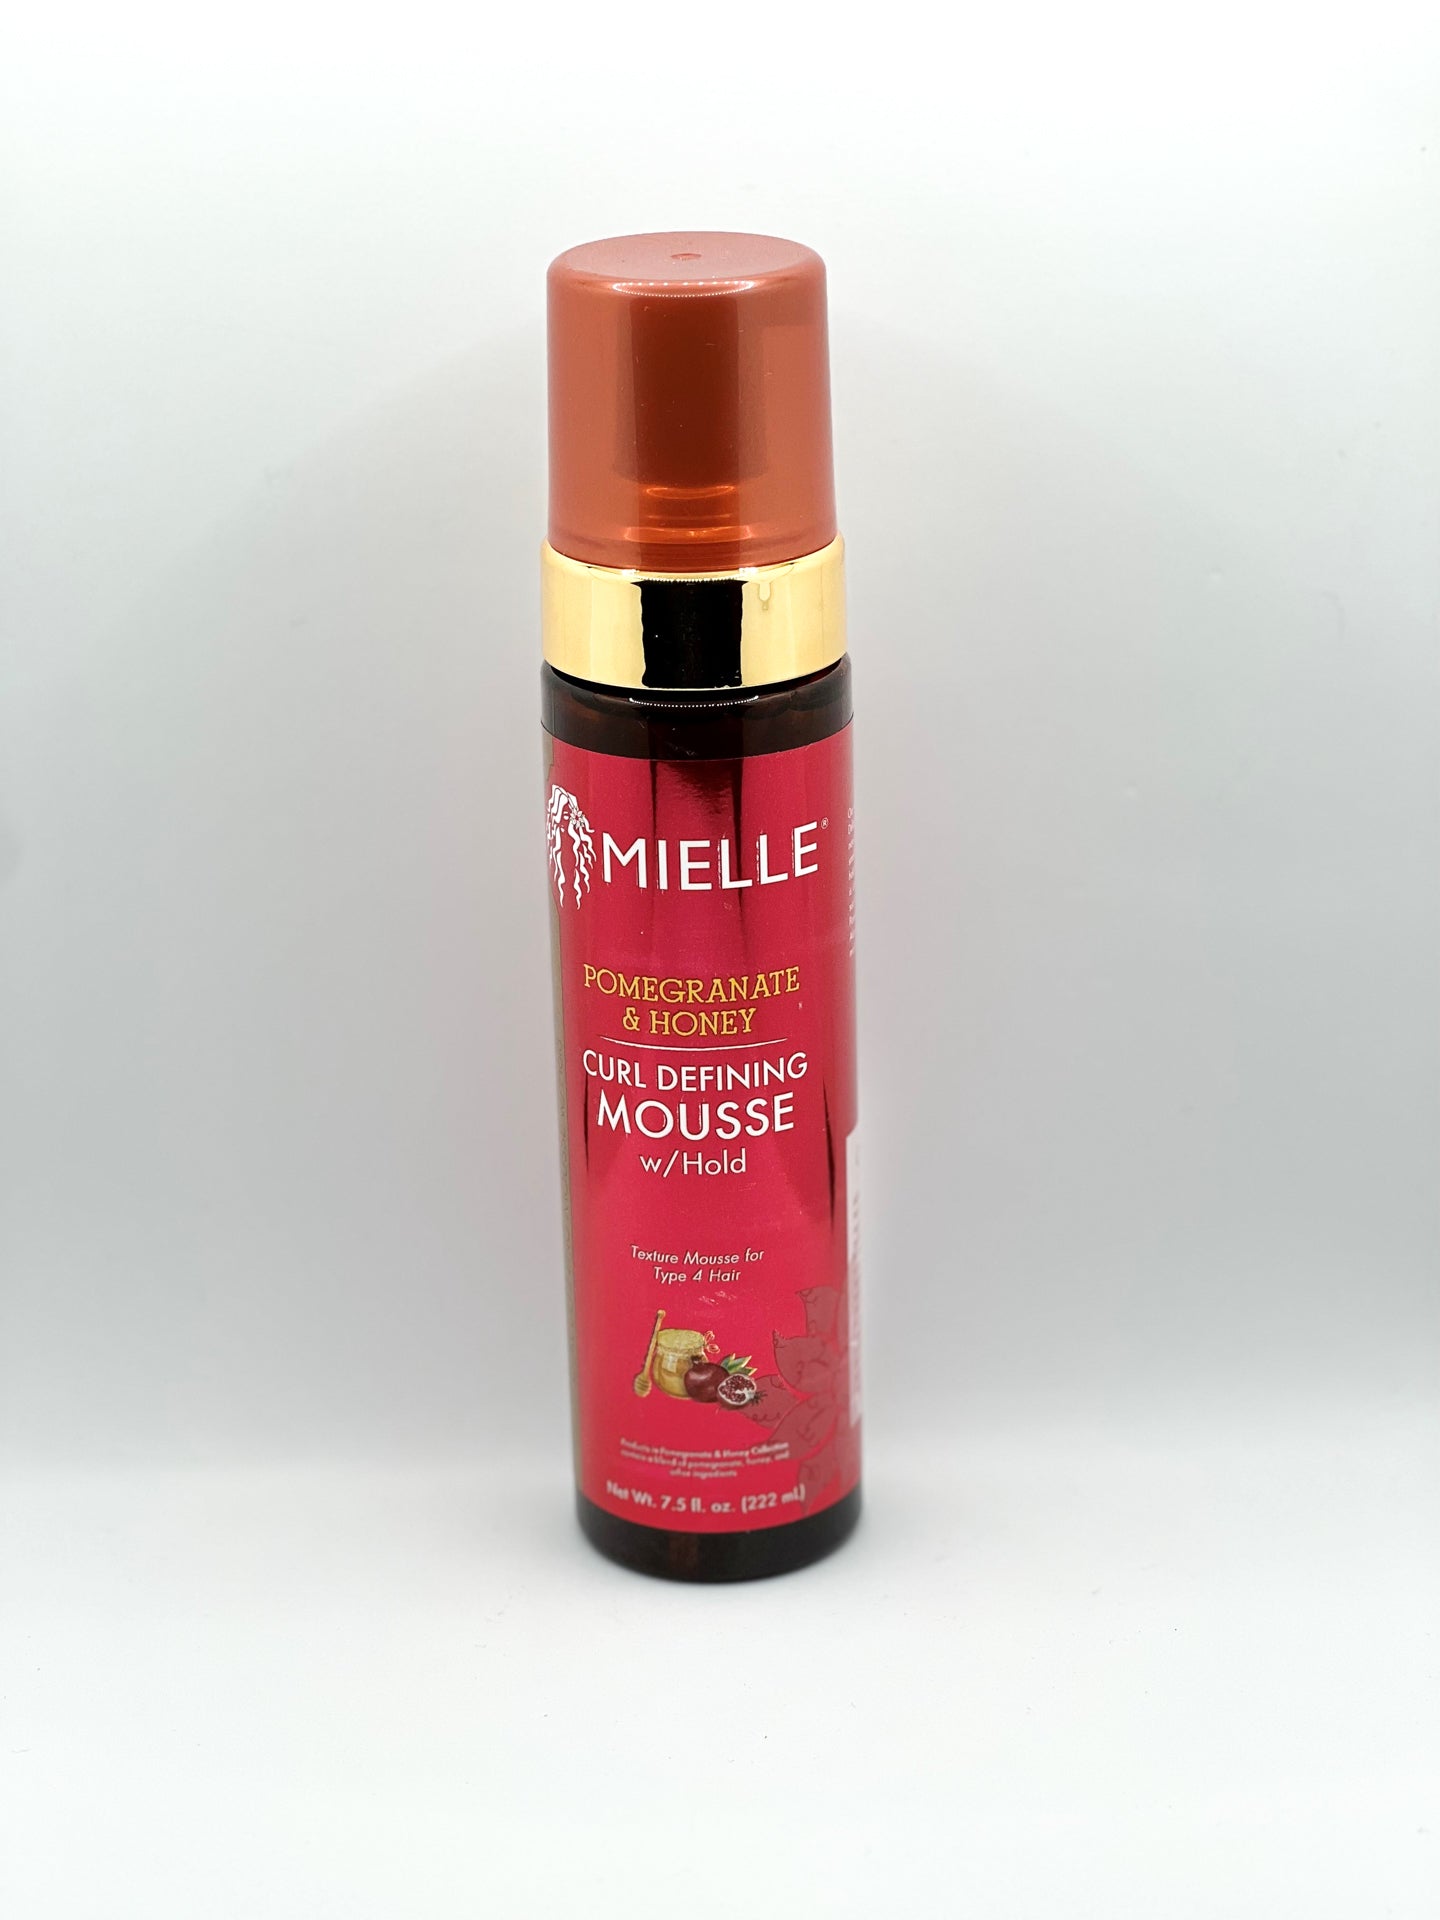 Pomegranate & Honey Curl Defining Mousse w/Hold